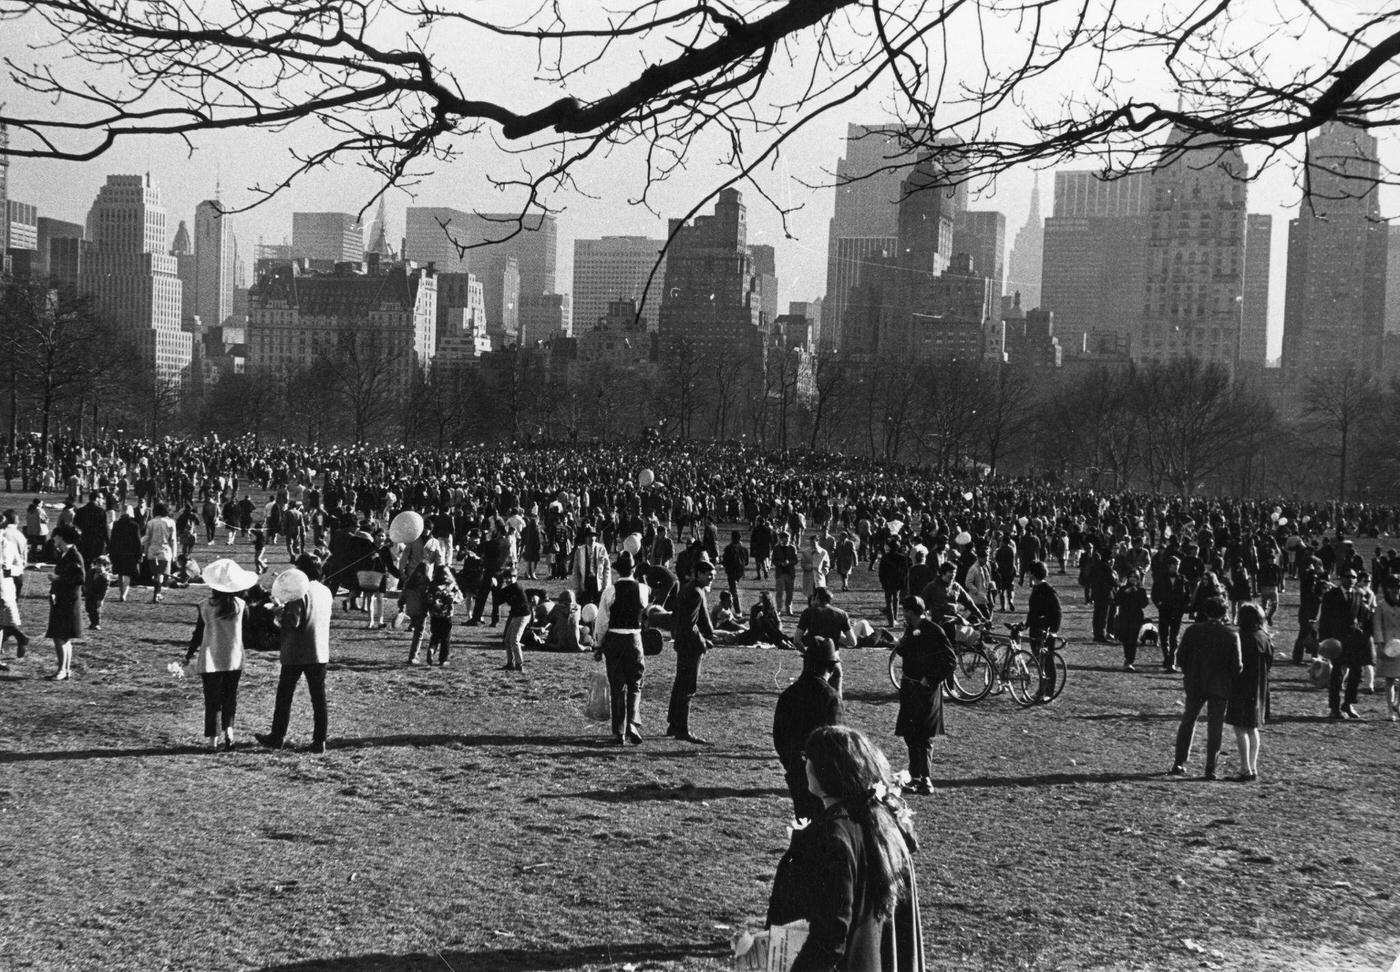 Crowd Arrives At Central Park'S Sheep Meadow For The 'Easter Be-In', Manhattan, 1967